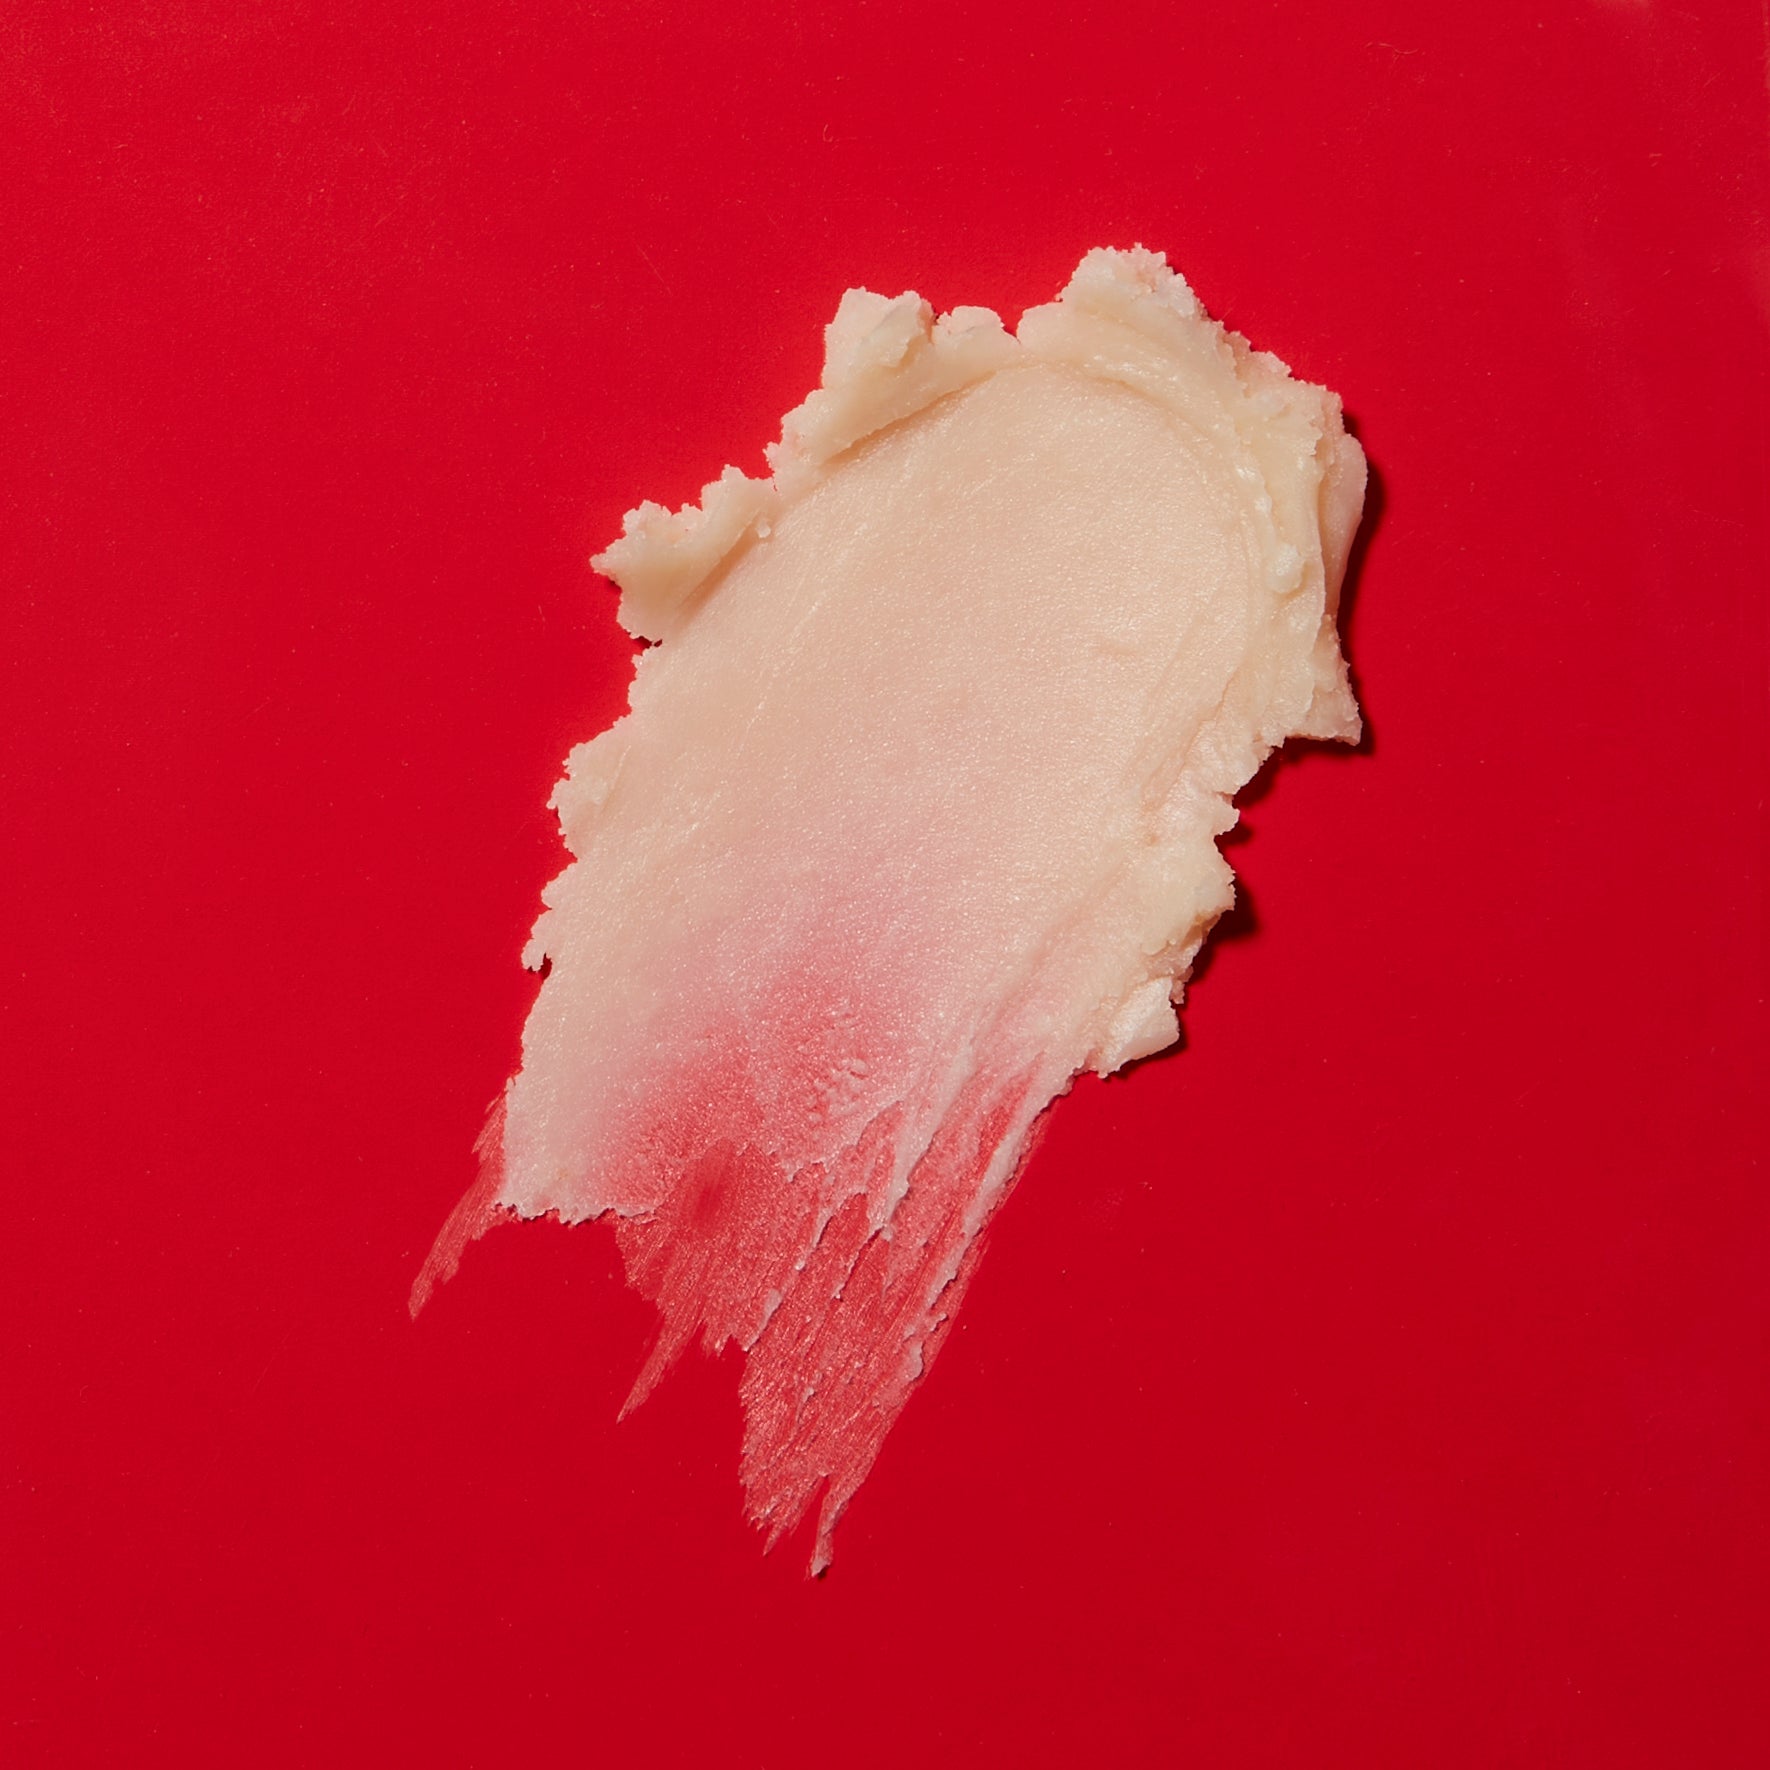 A swatch of the Proshine Solid Body Oil. The swatch of the creamy off white product is on a bright red background.